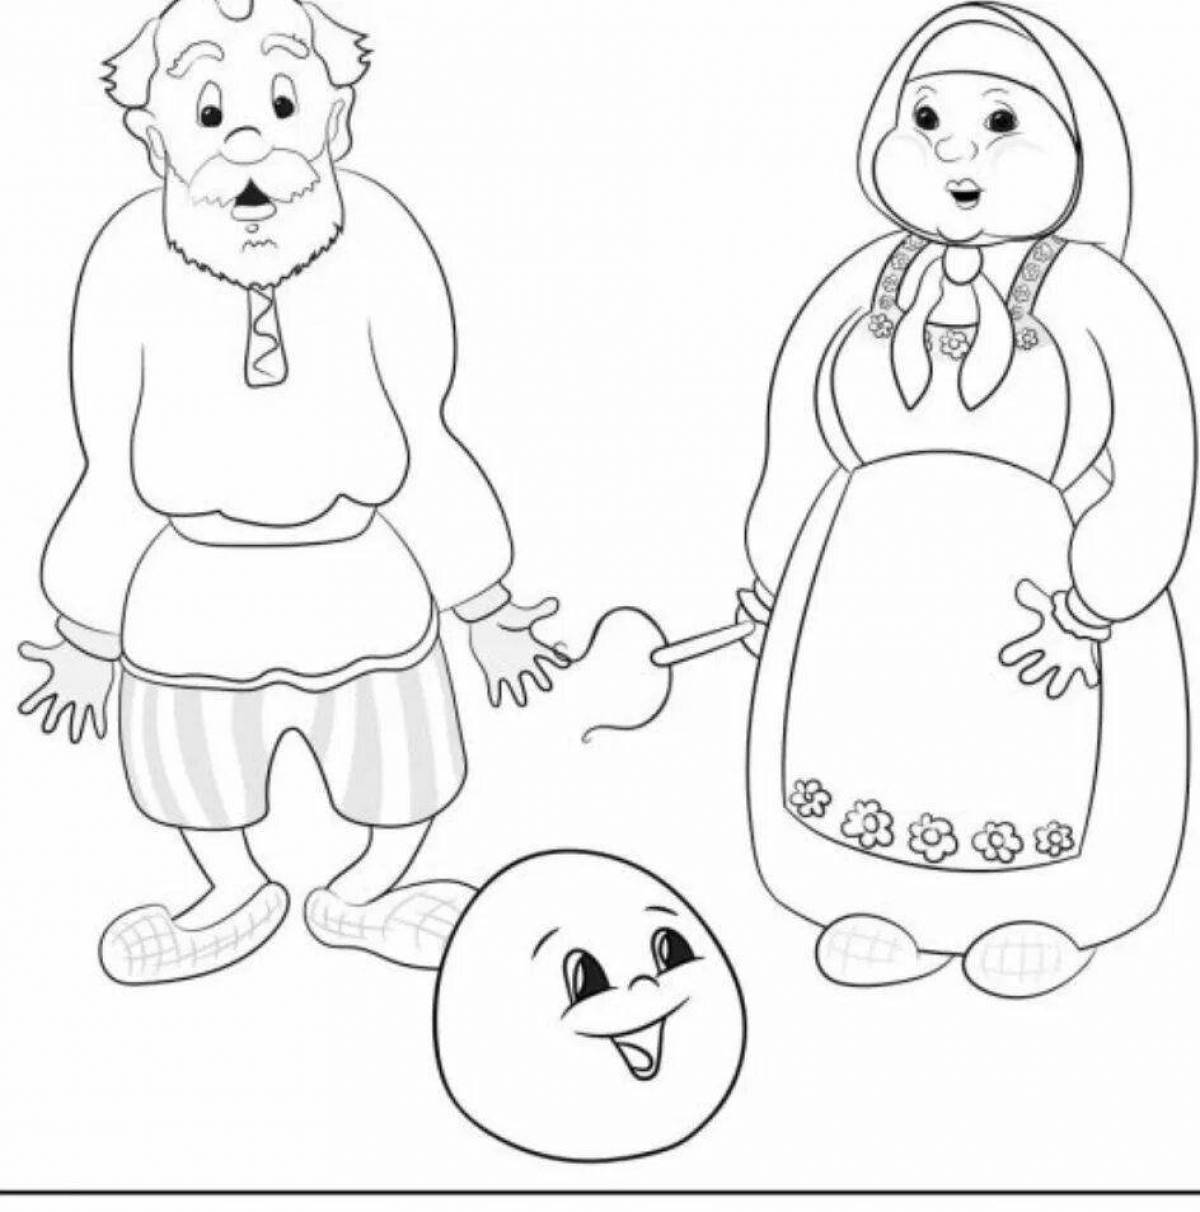 Coloring page cute bun and bear